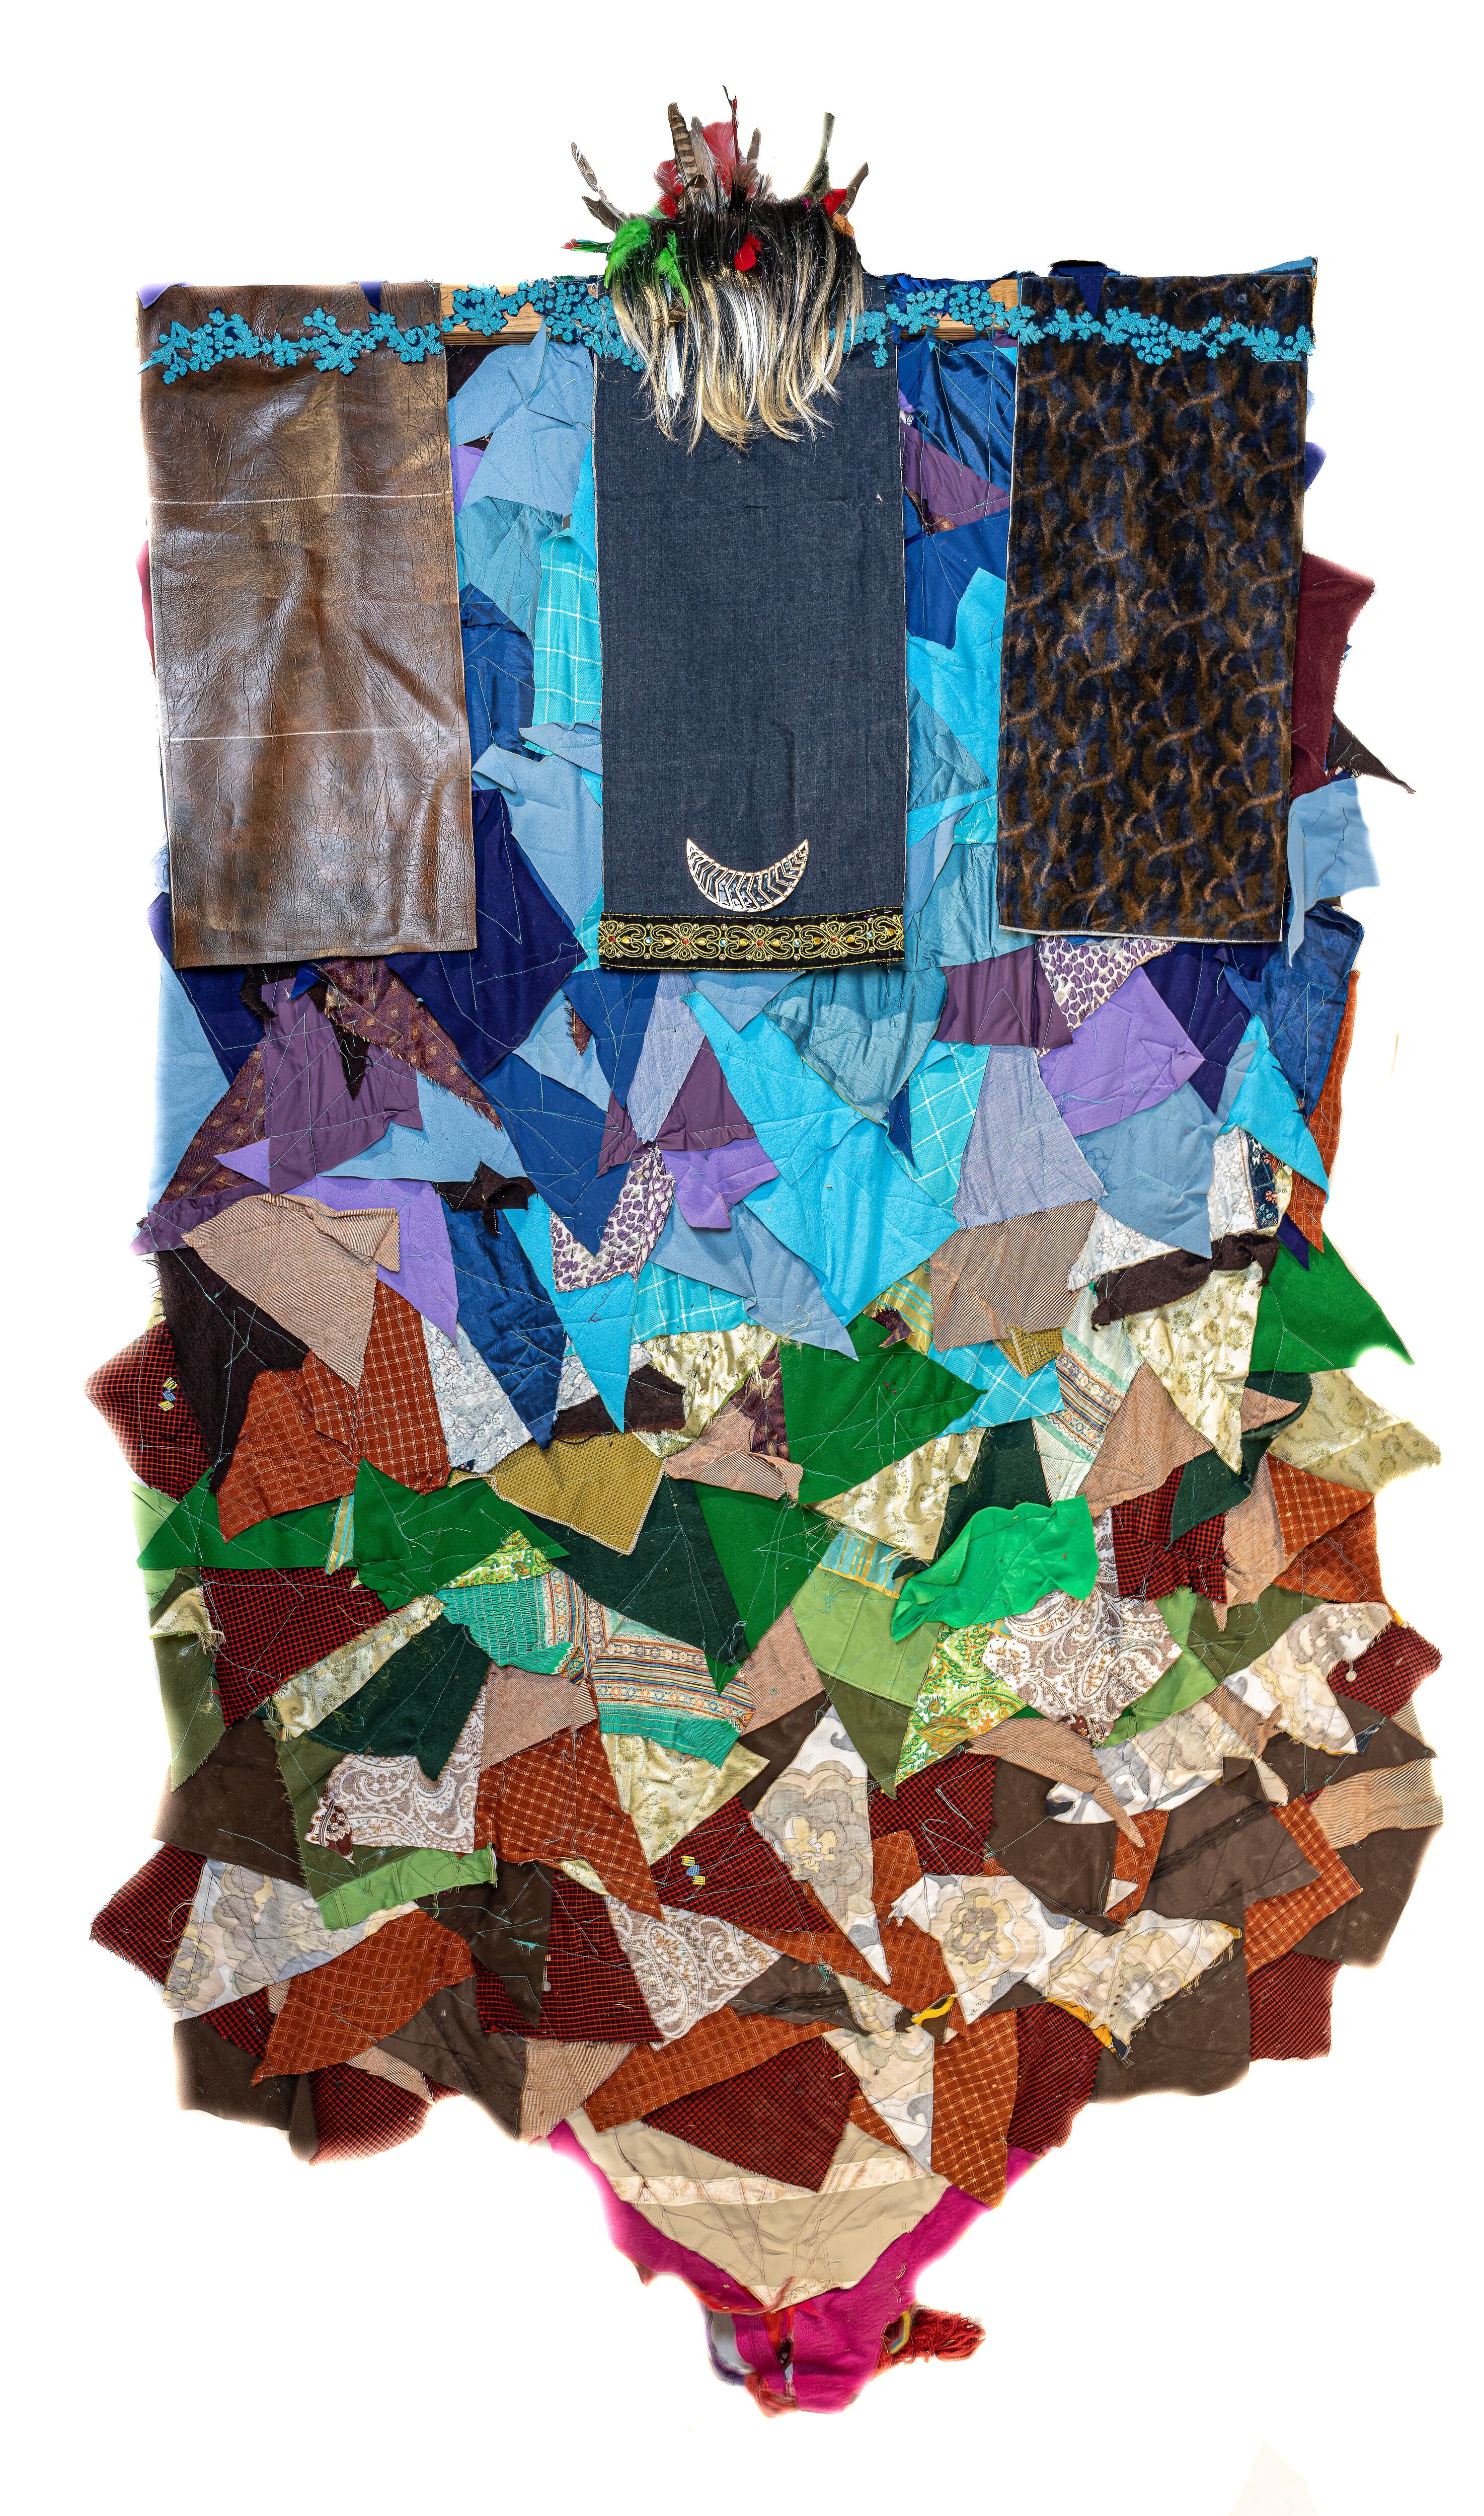 A vertical collage of triangular textile pieces in varied colors, topped with a section of leather and dark denim, adorned with a crescent emblem and a fur headdress.